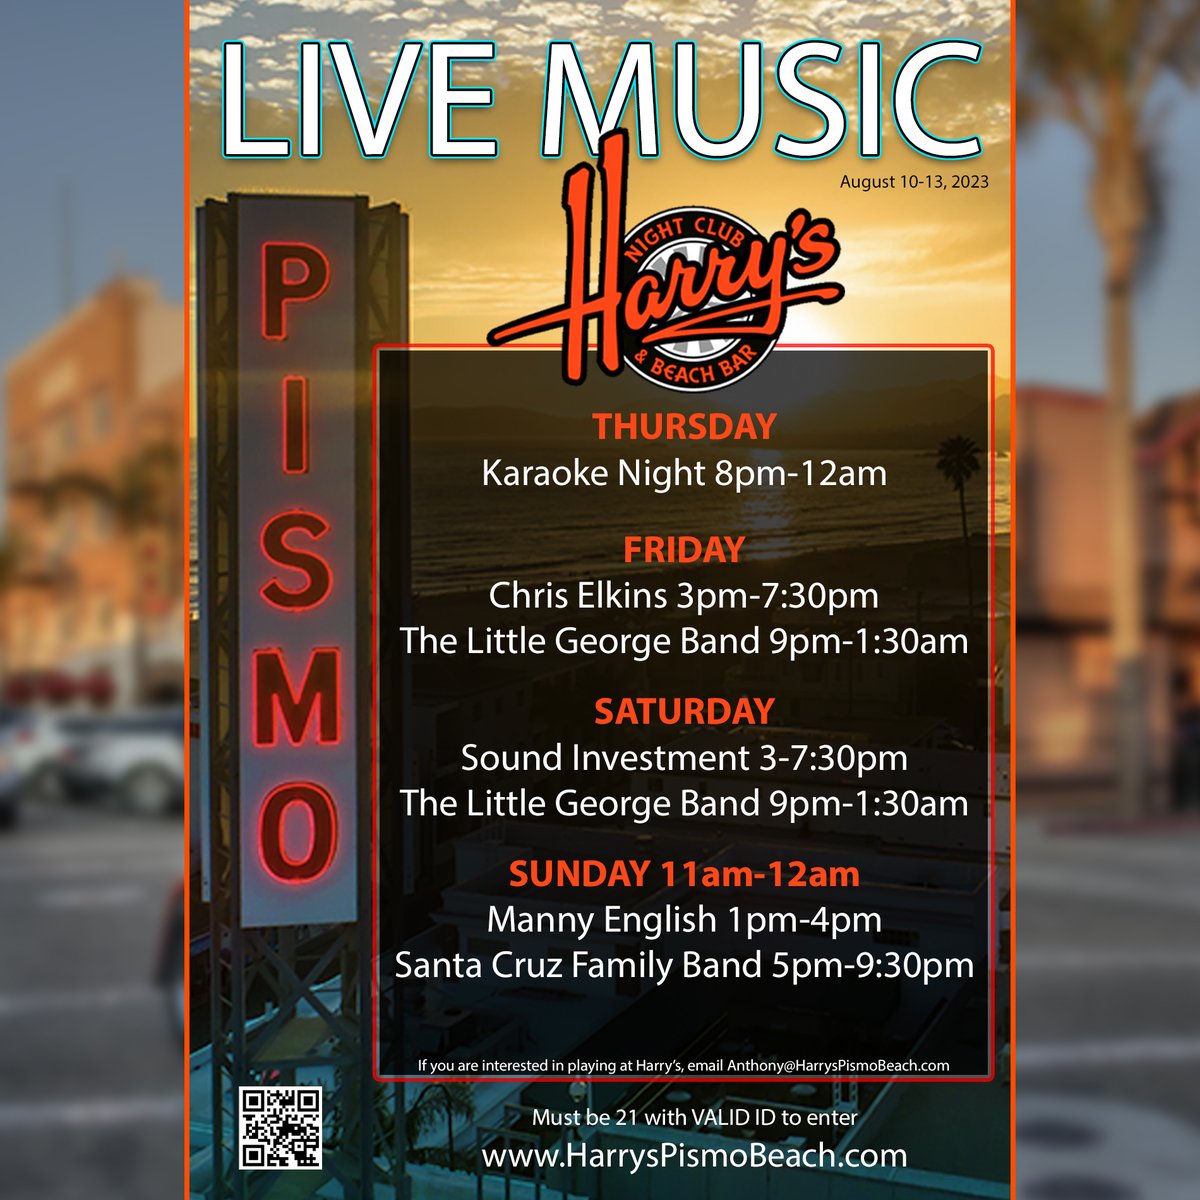 We've got some great music coming your way this weekend! Check it out. We have updated our Band Calendar for August. Check our website to see who's coming to Harry's.
#harryspismobeach #harryspismo #pismobeach #livemusic #liveband #classicrock #dancing #pismo